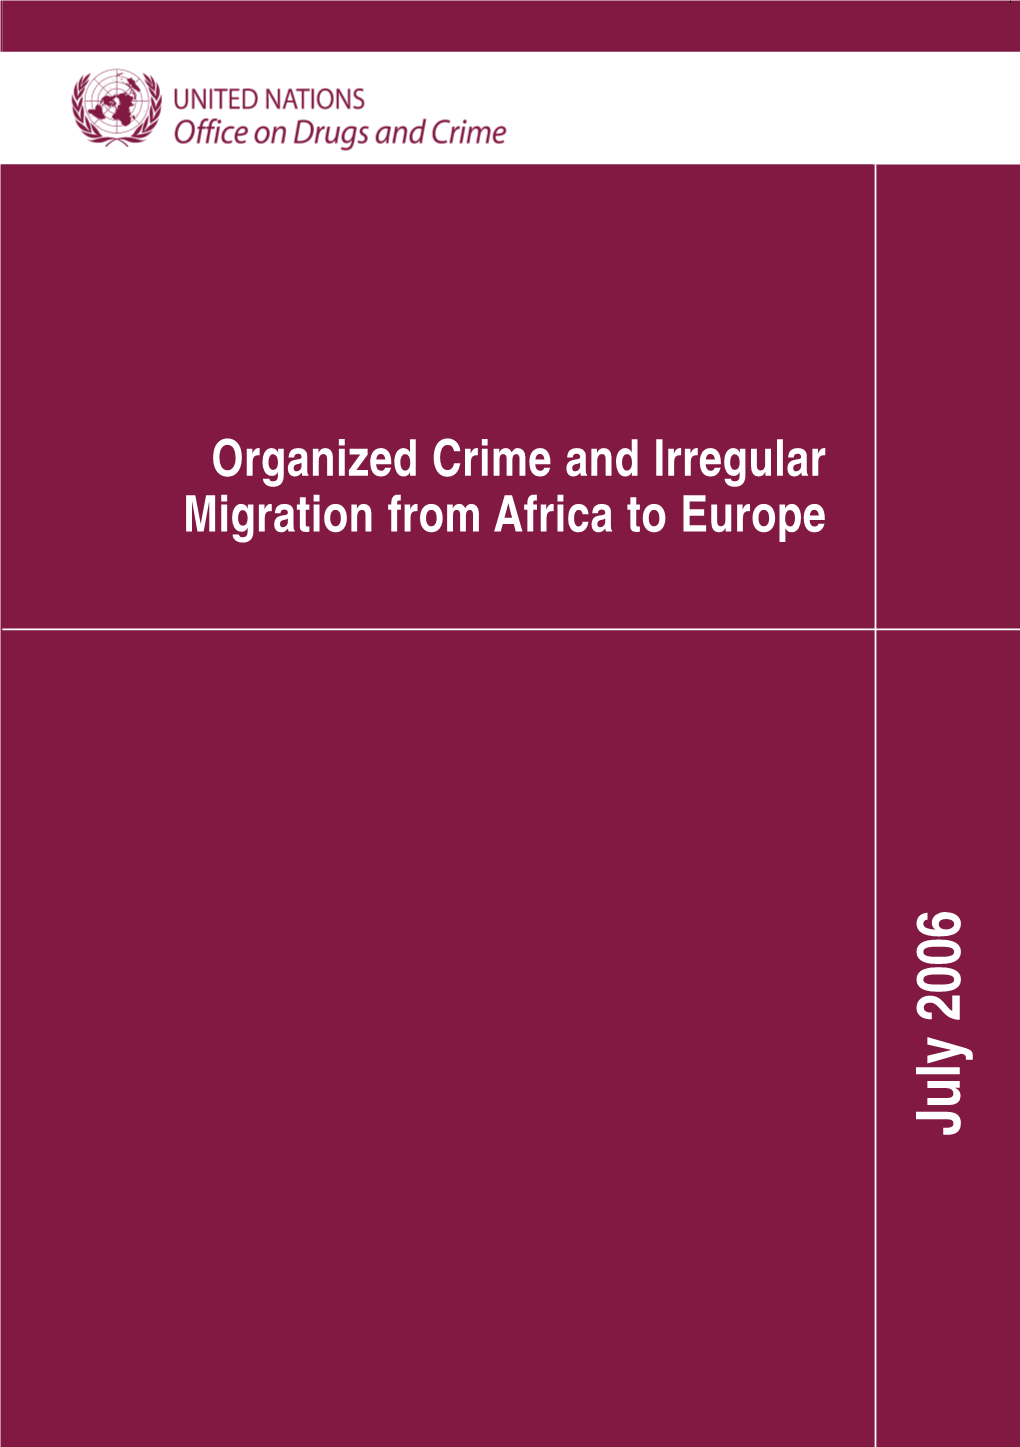 Organized Crime and Irregular Migration from Africa to Europe July 2006